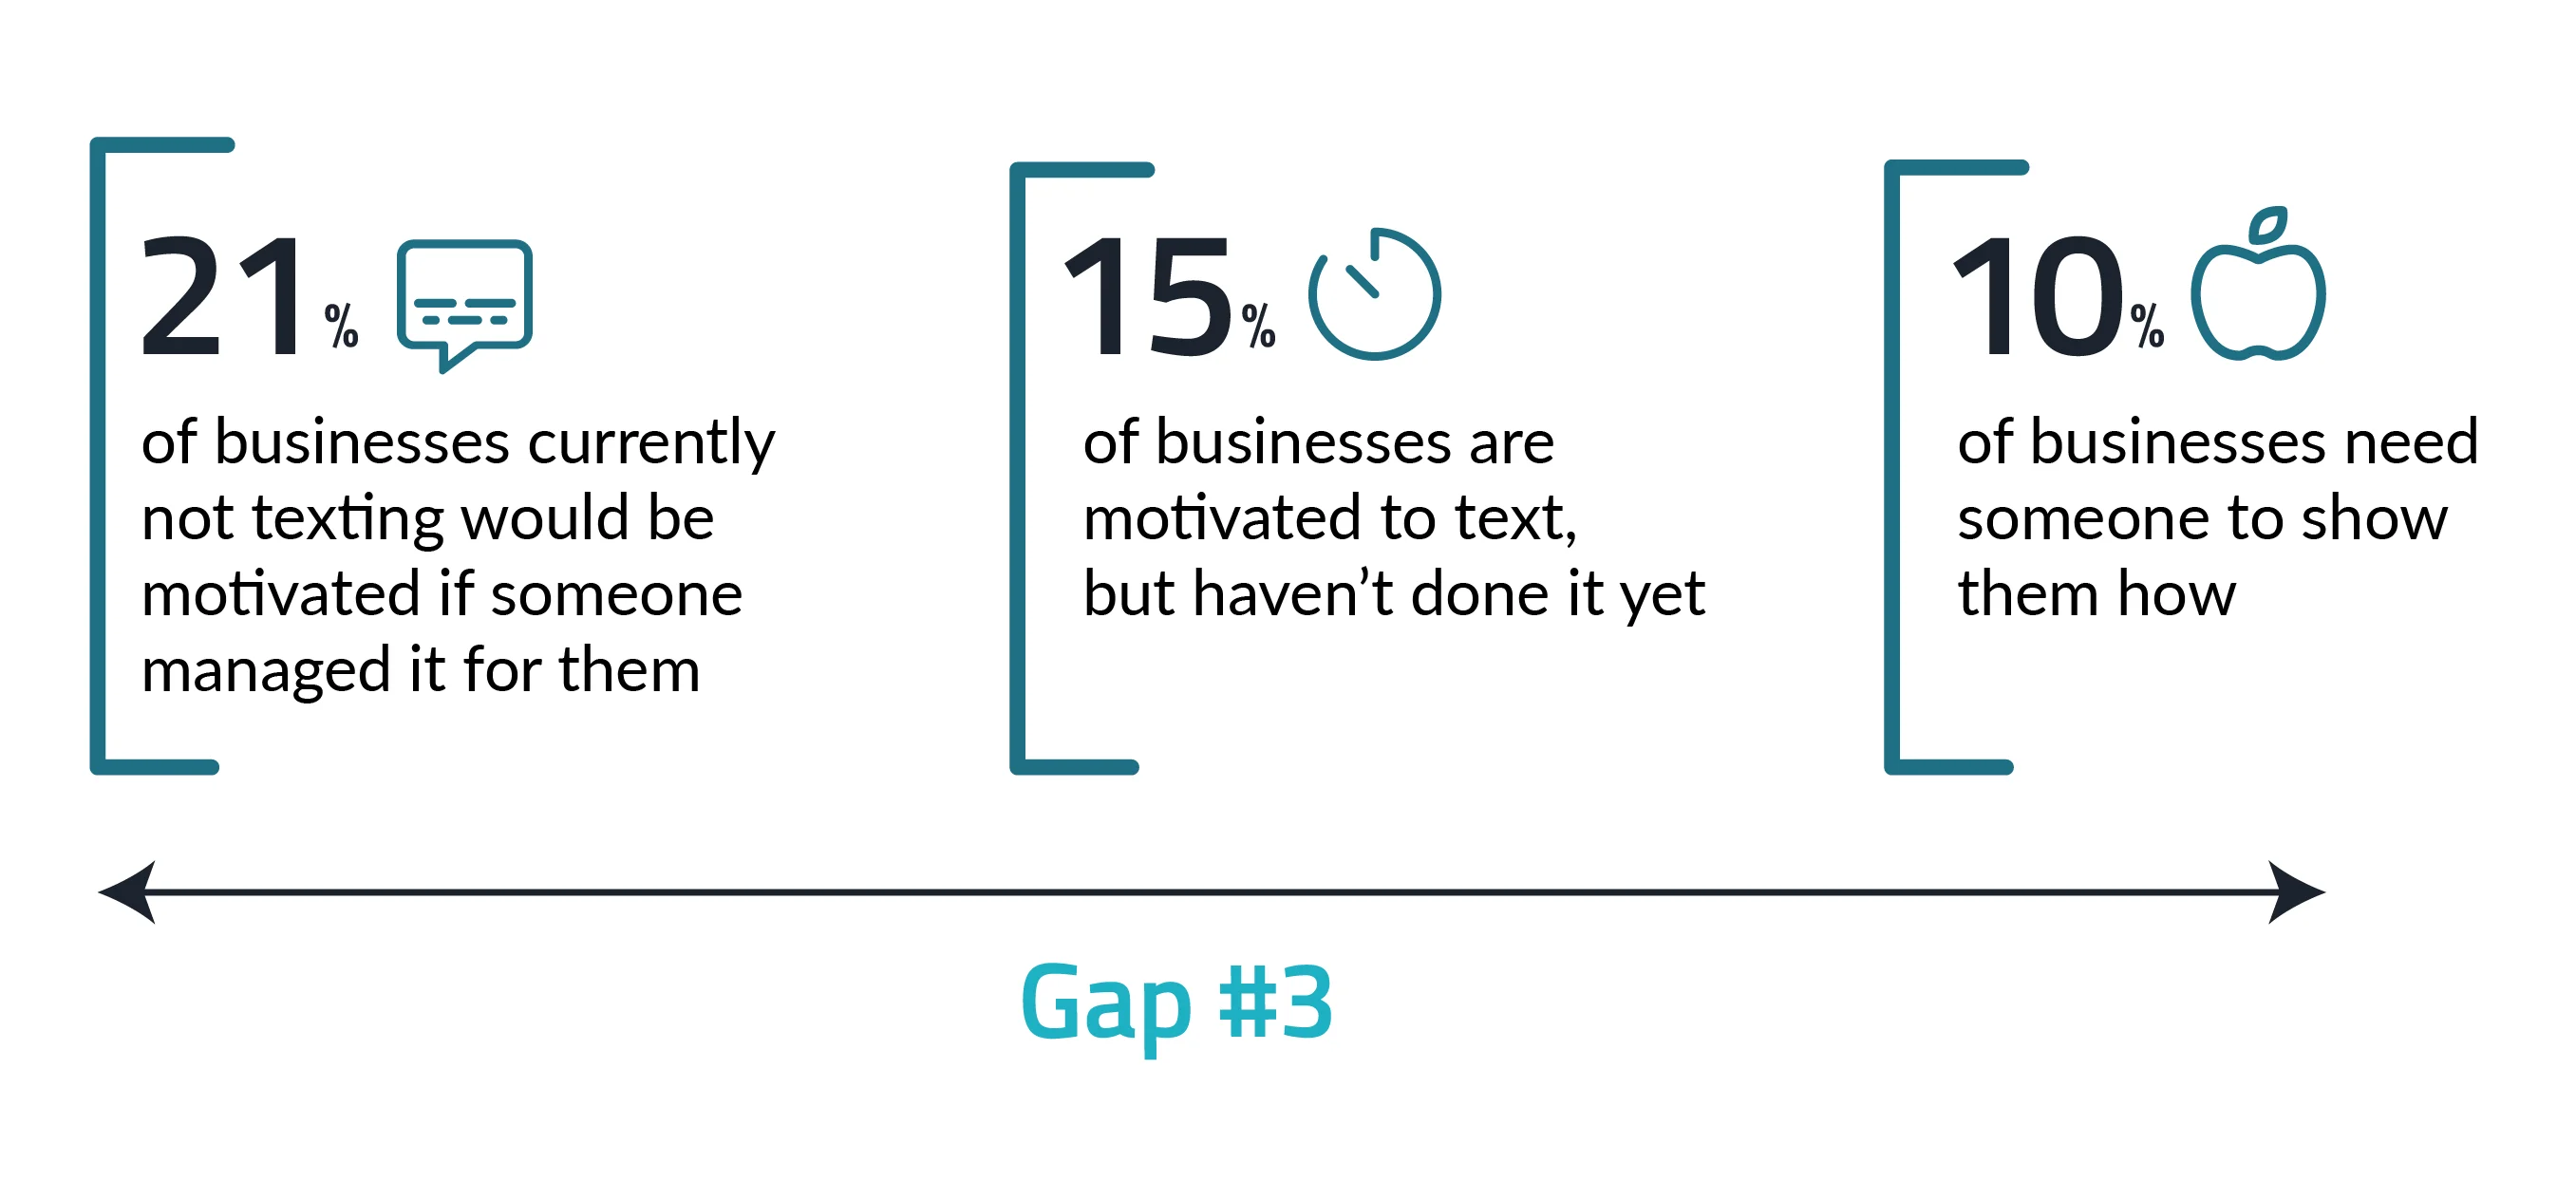 text-messaging-gap-businesses-are-motivated-to-text 